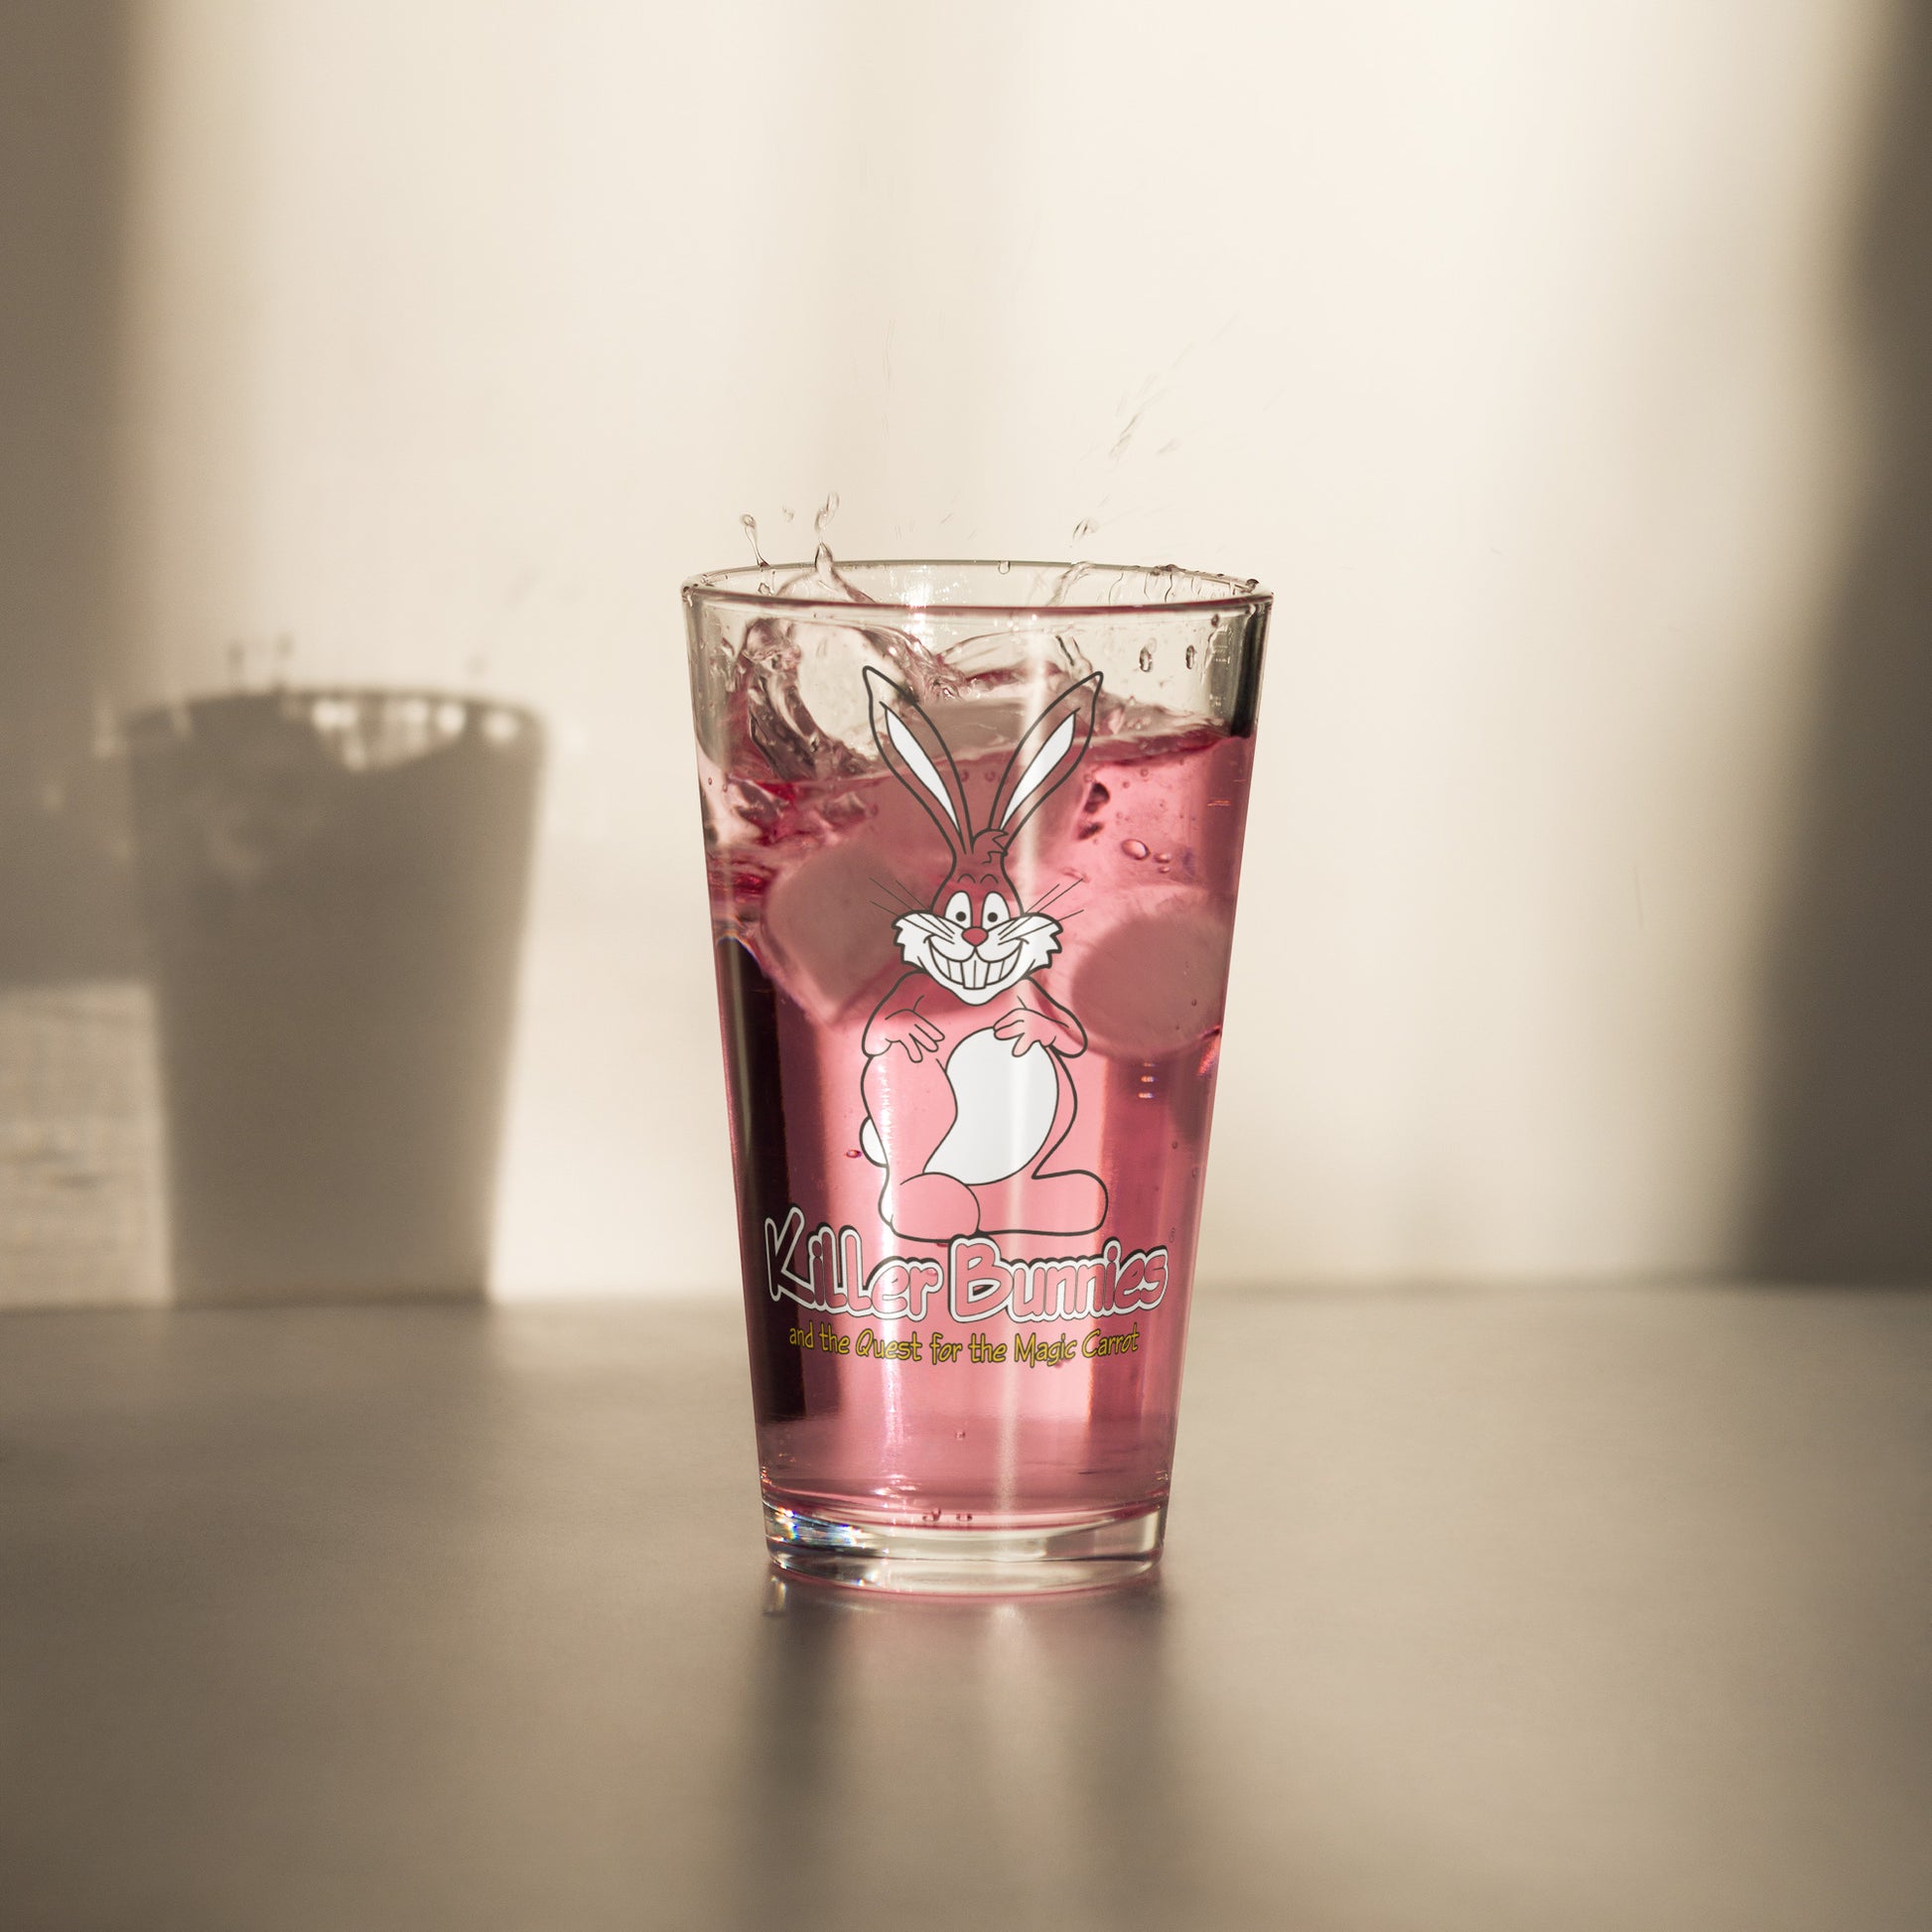 Gleeful Bunny Pint Glass with pink drink